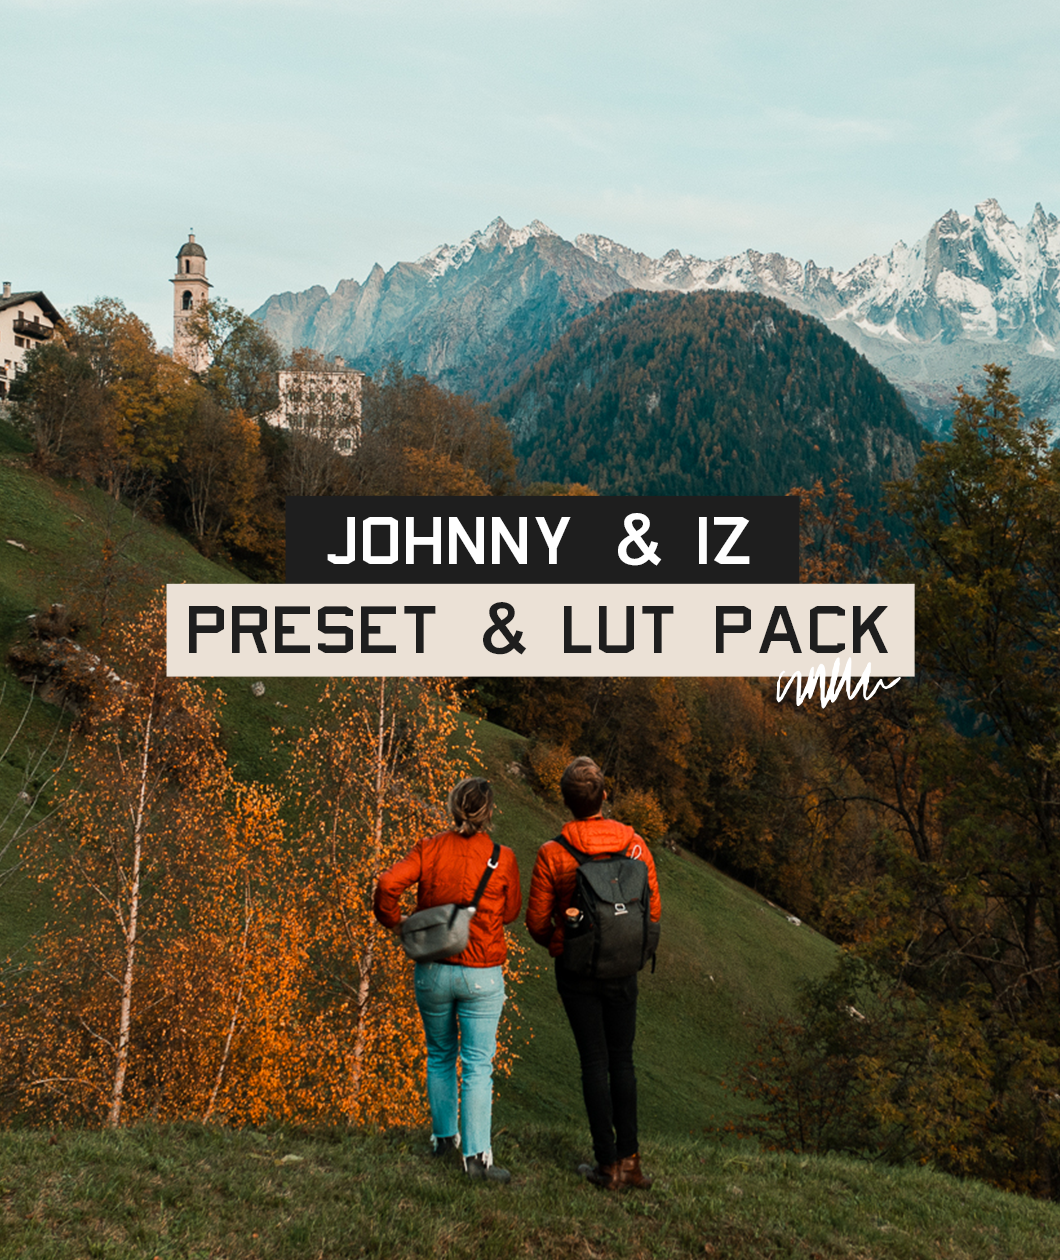 A photo of two people in orange jackets facing a mountain view. The text "Johnny & Iz Preset & LUT Pack" is in the center - by Iz & Johnny Harris